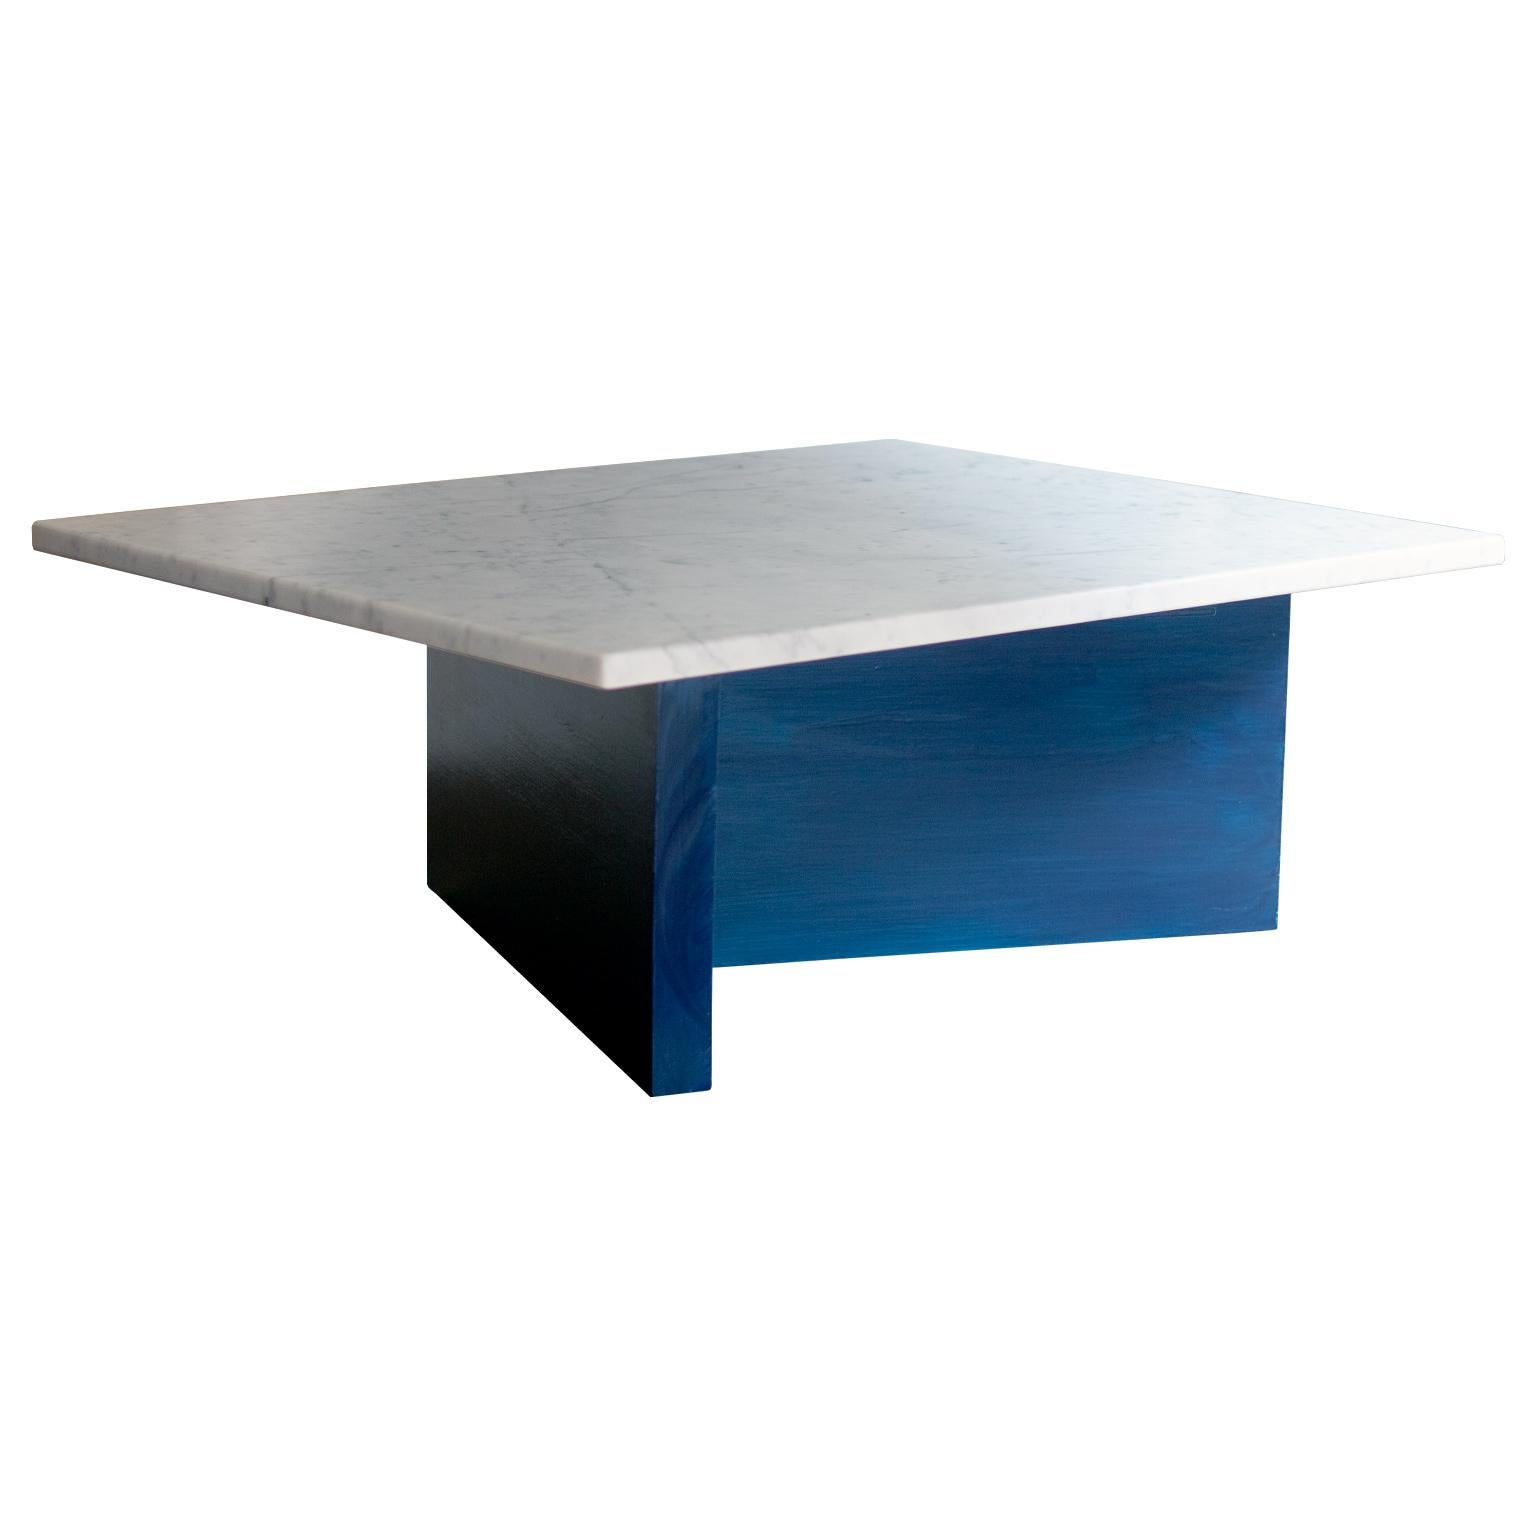 A beautiful, minimal coffee table inspired by Bauhaus architecture and art. 
This piece features a honed Carrara marble top on a solid maple wood base finished in lacquer. 

Customizable marble and lacquer finishes are available. 
Customizable